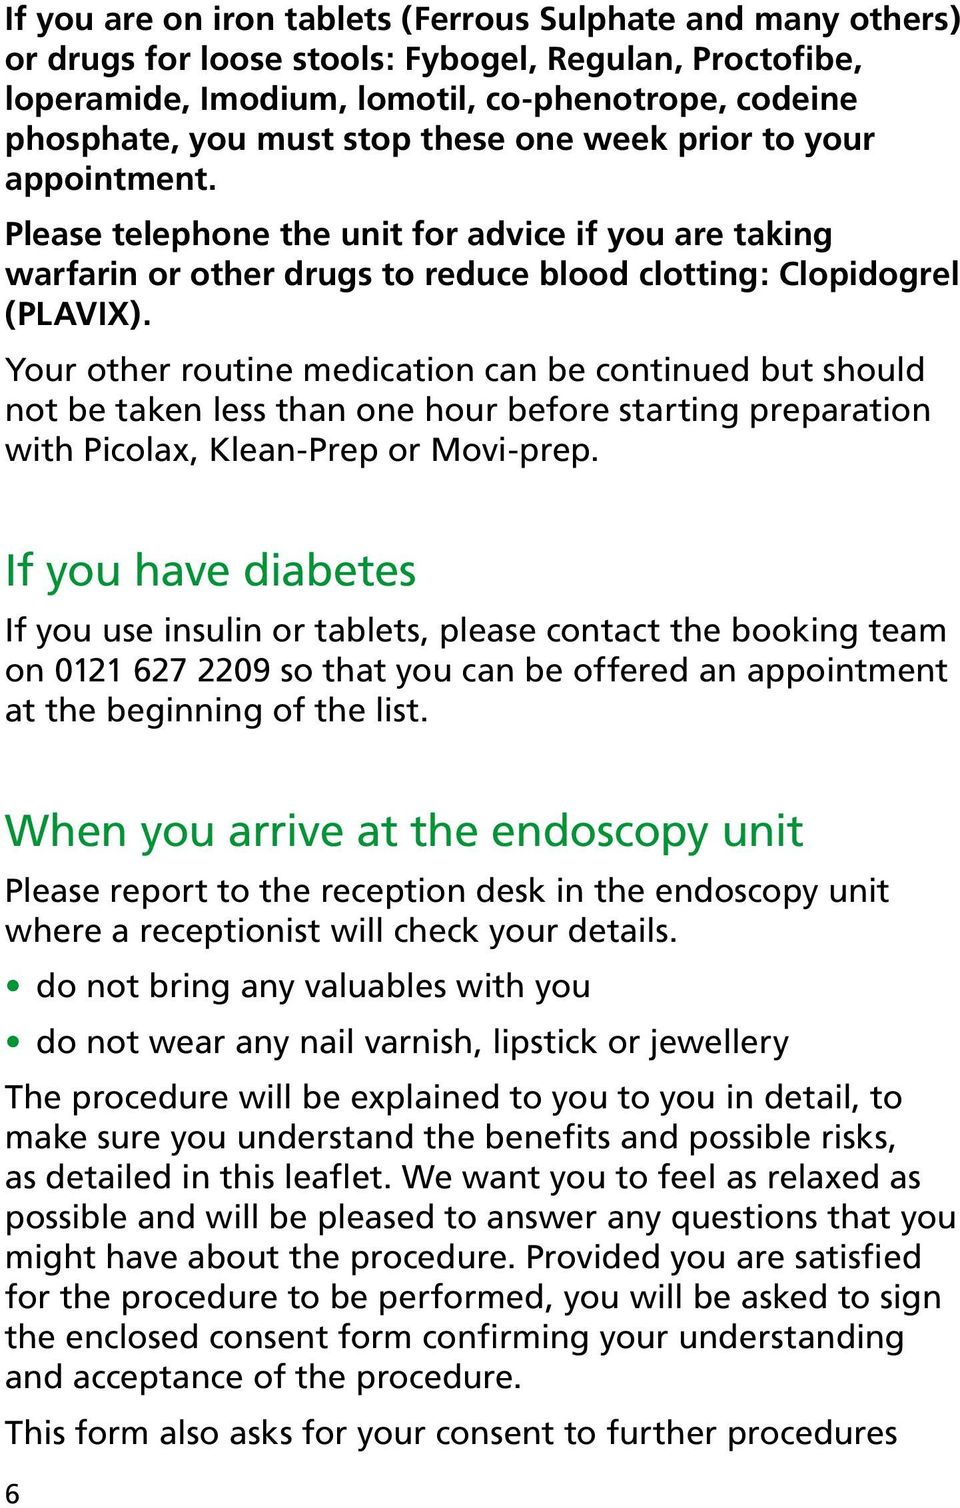 Your other routine medication can be continued but should not be taken less than one hour before starting preparation with Picolax, Klean-Prep or Movi-prep.